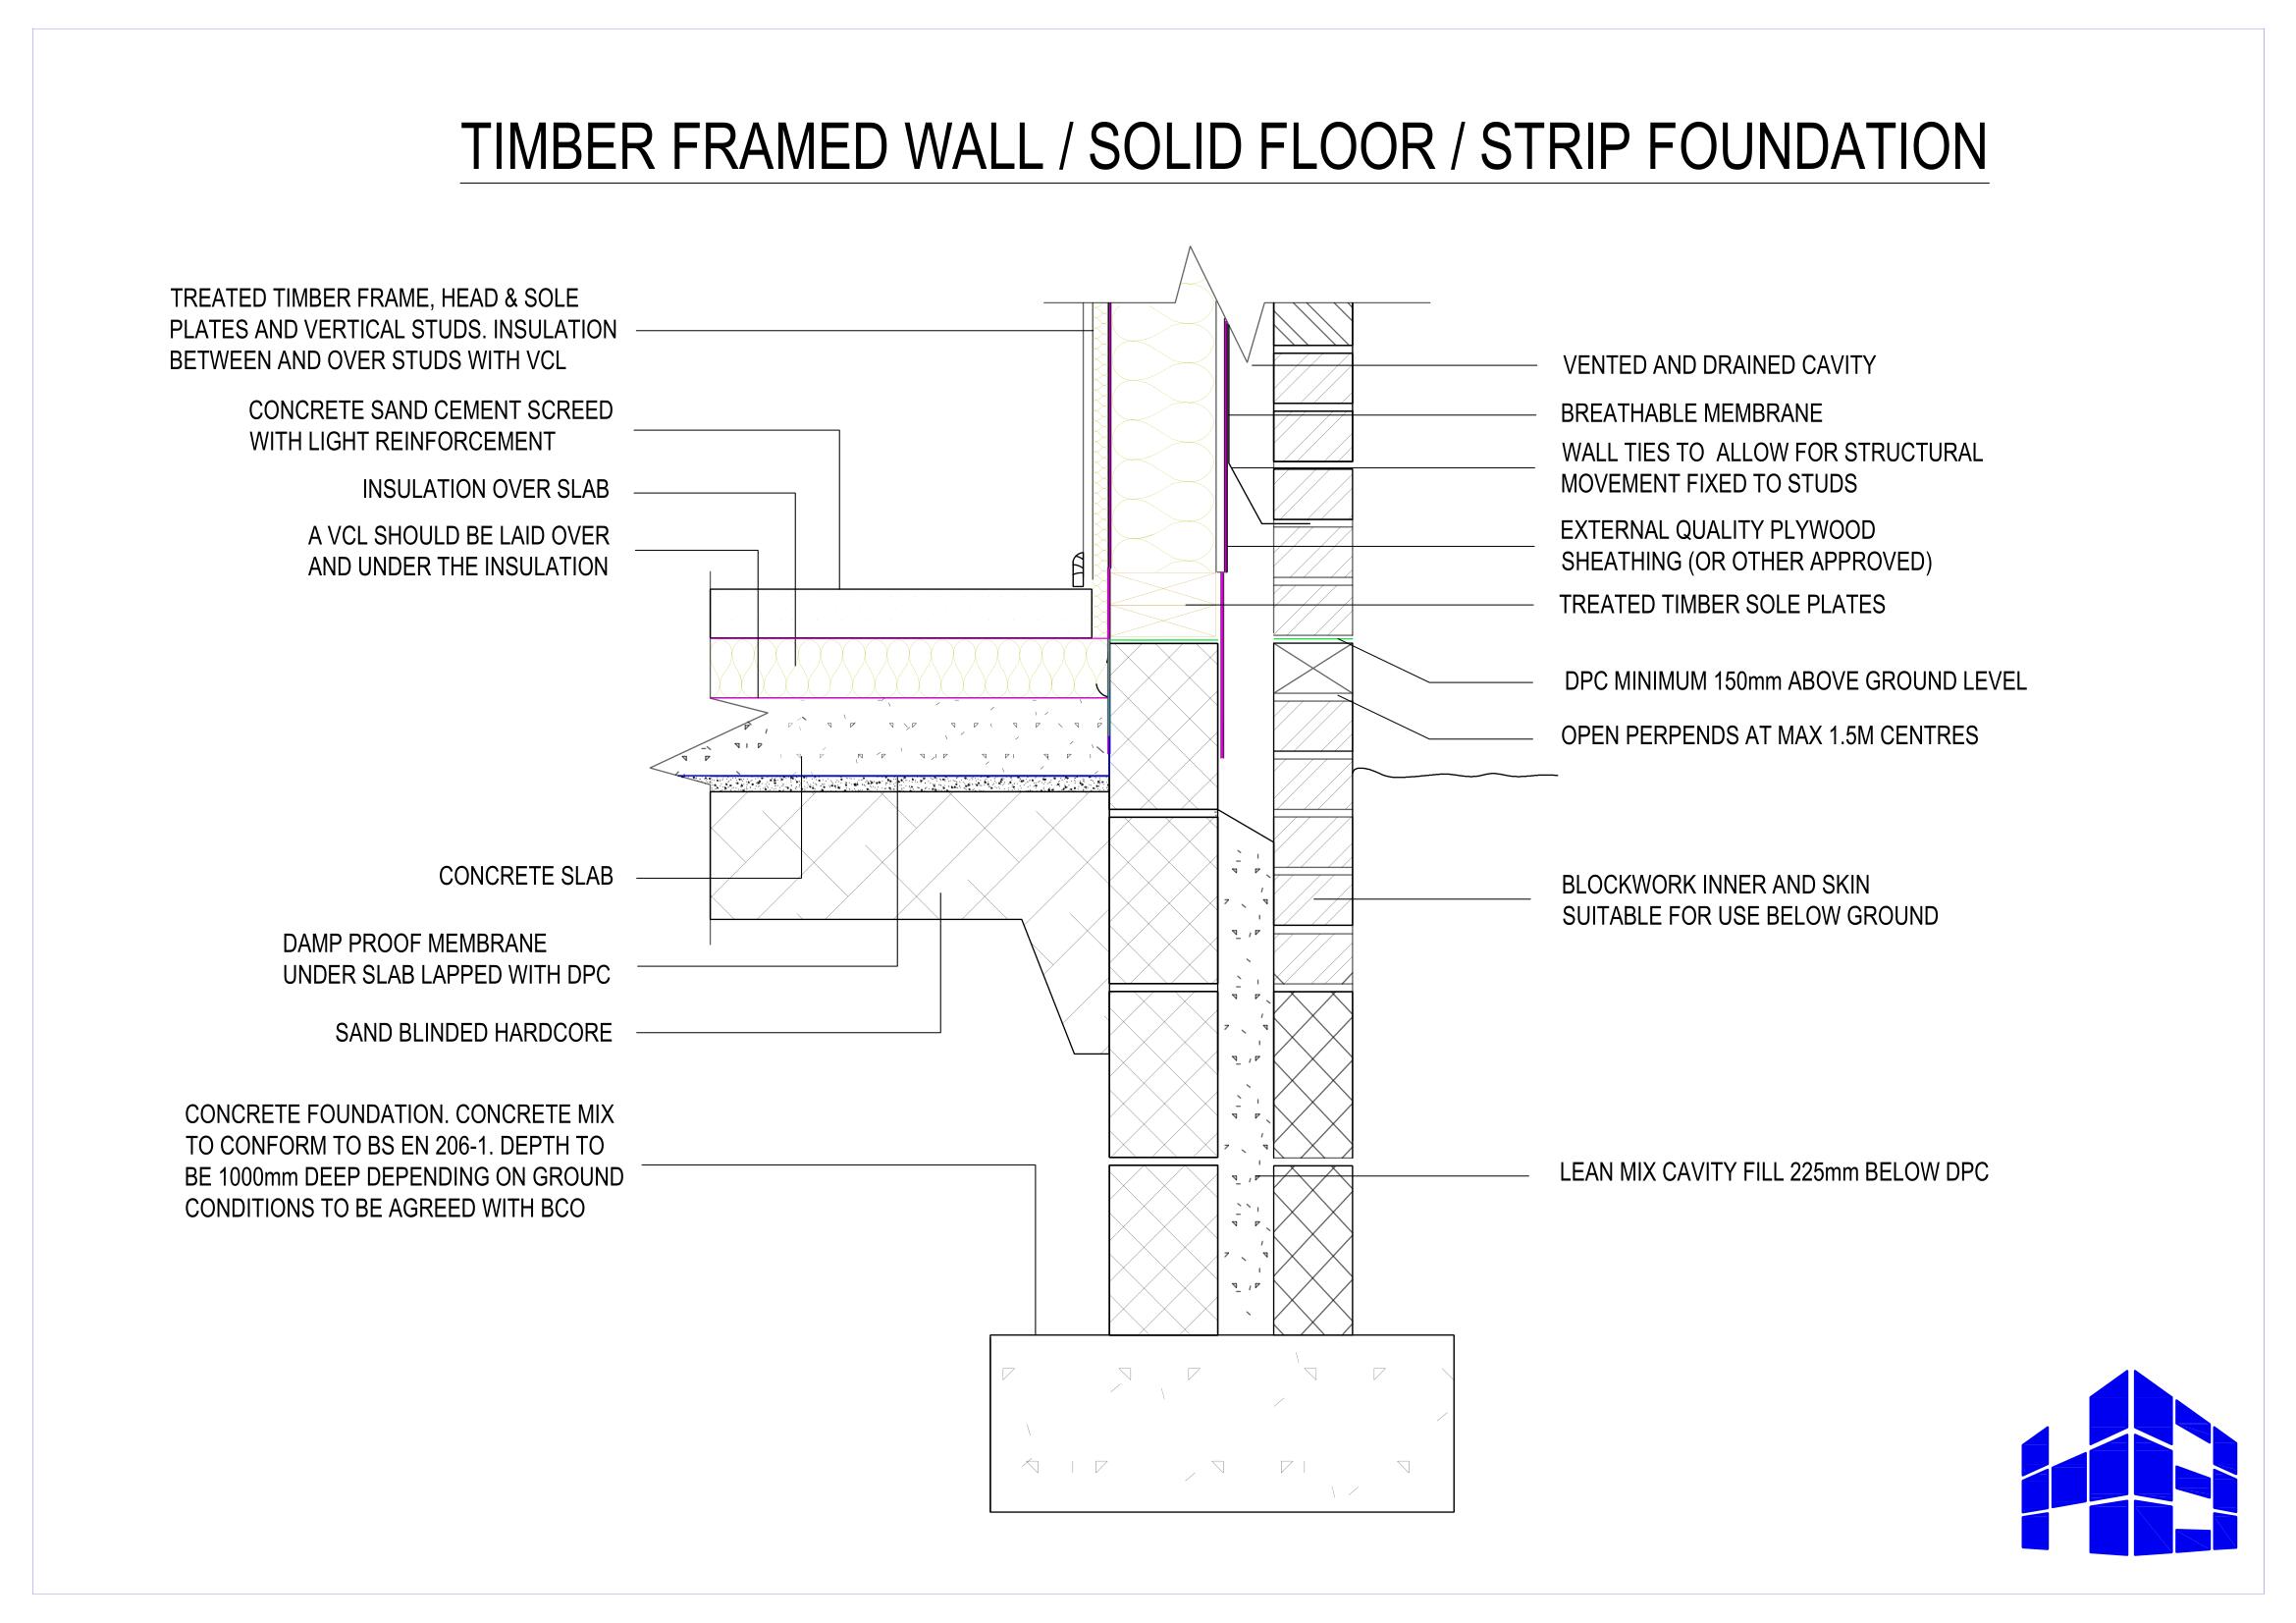 STRUCTURE magazine | Evaluation of Existing Timber Structures